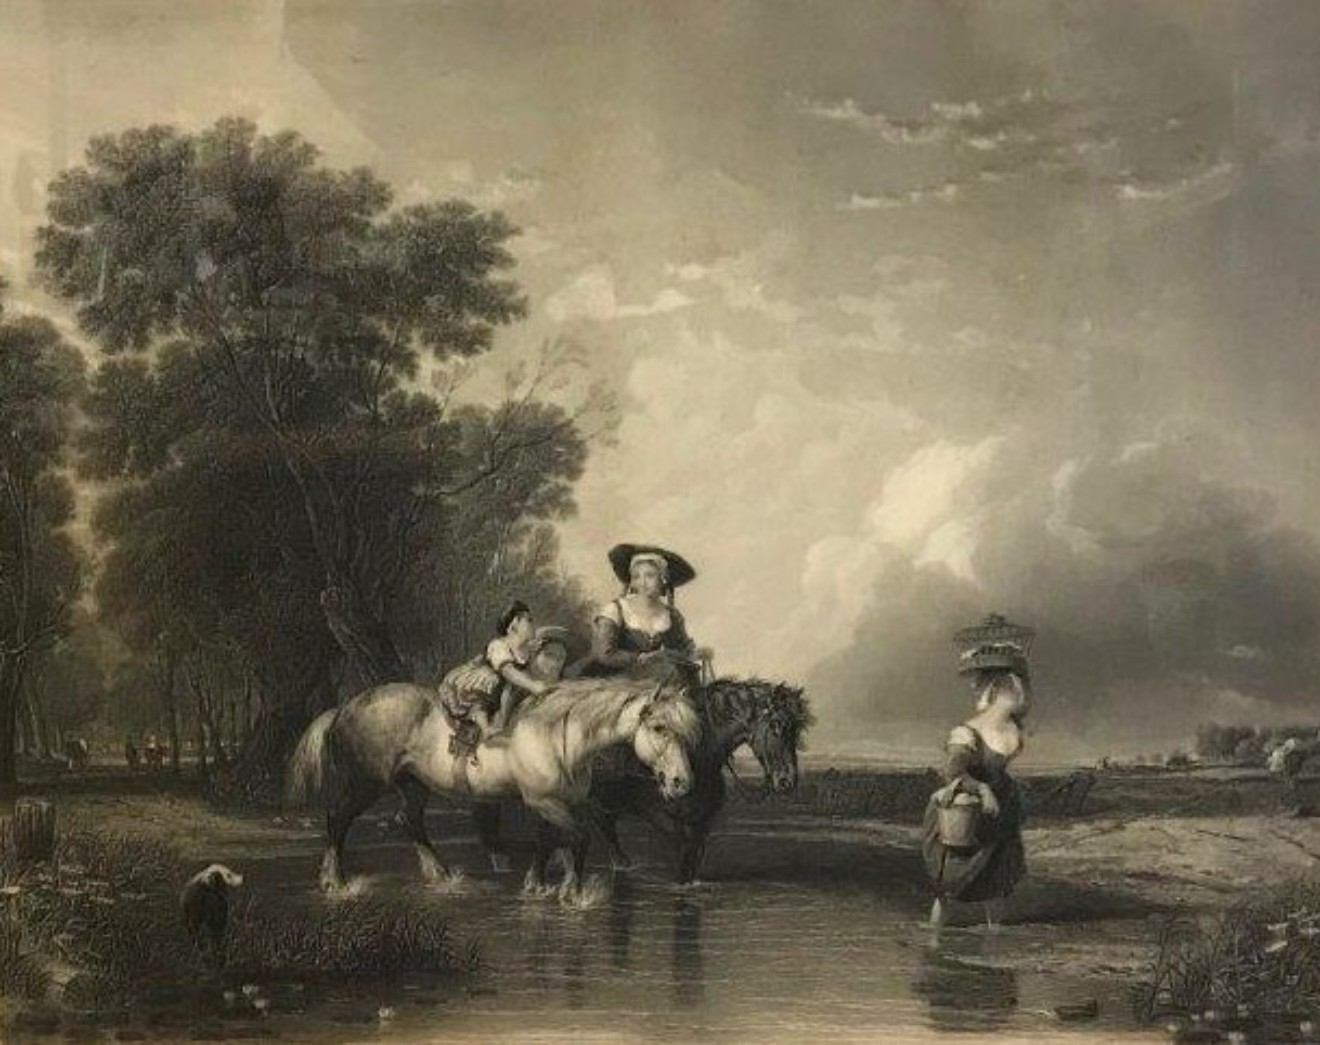 Victorian Engraving "Returning From Market (Crossing The Stream)" From the Original Painting by Sir Augustus W Callcott RA